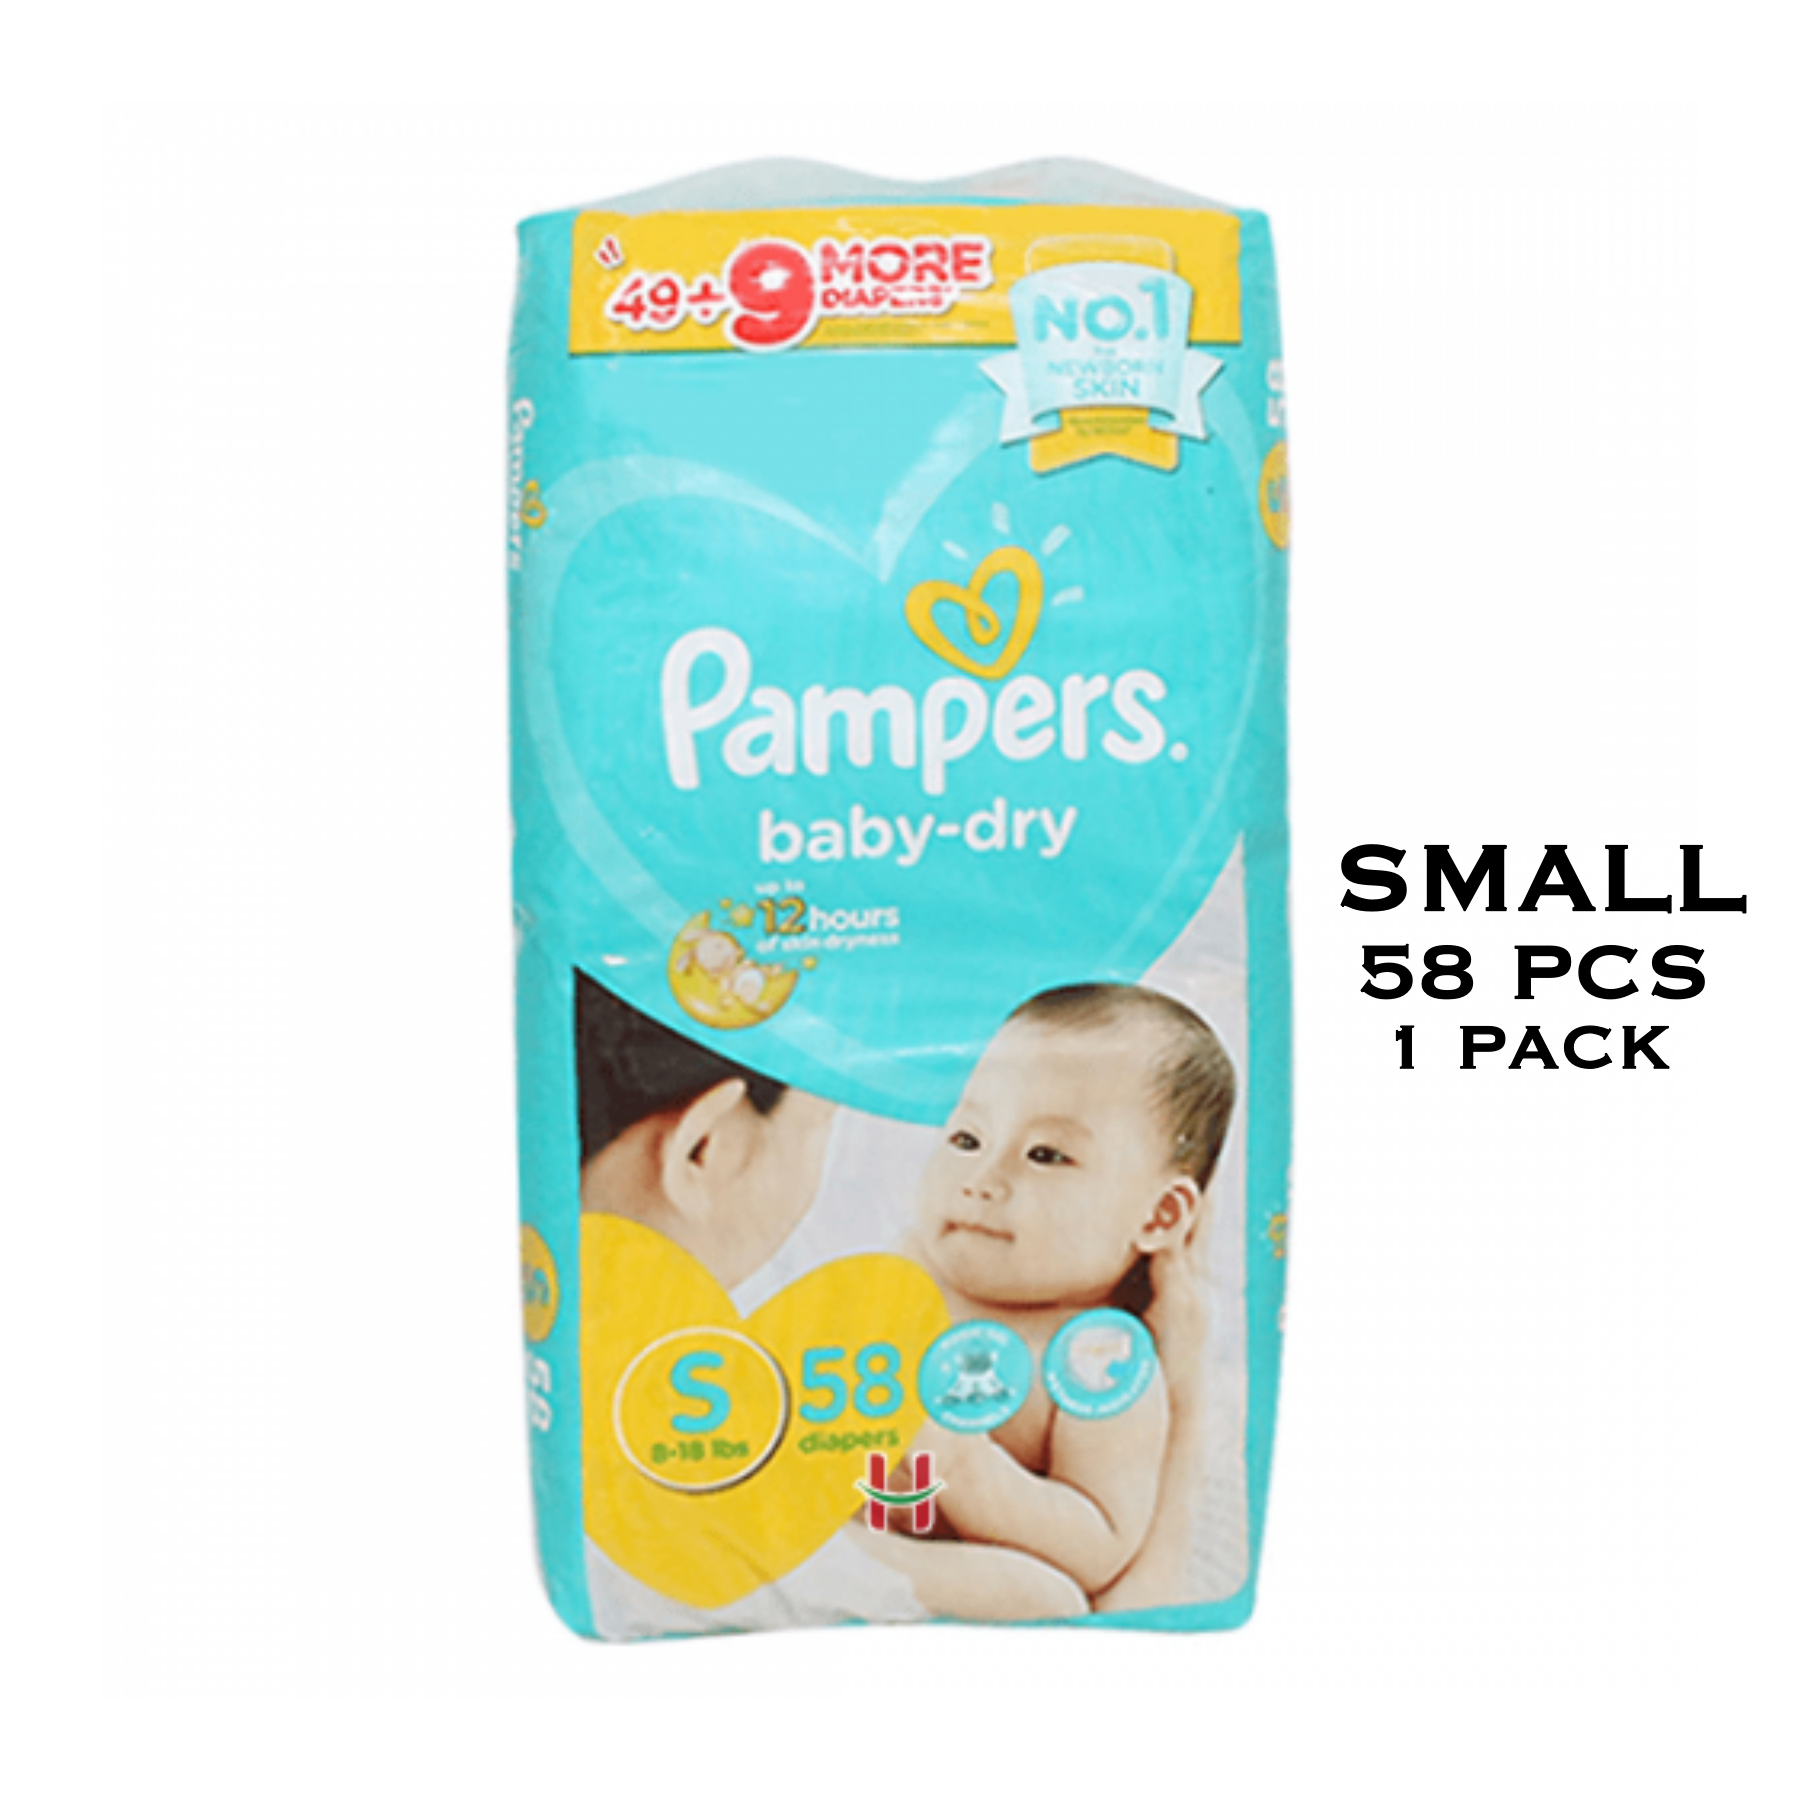 pampers small pack